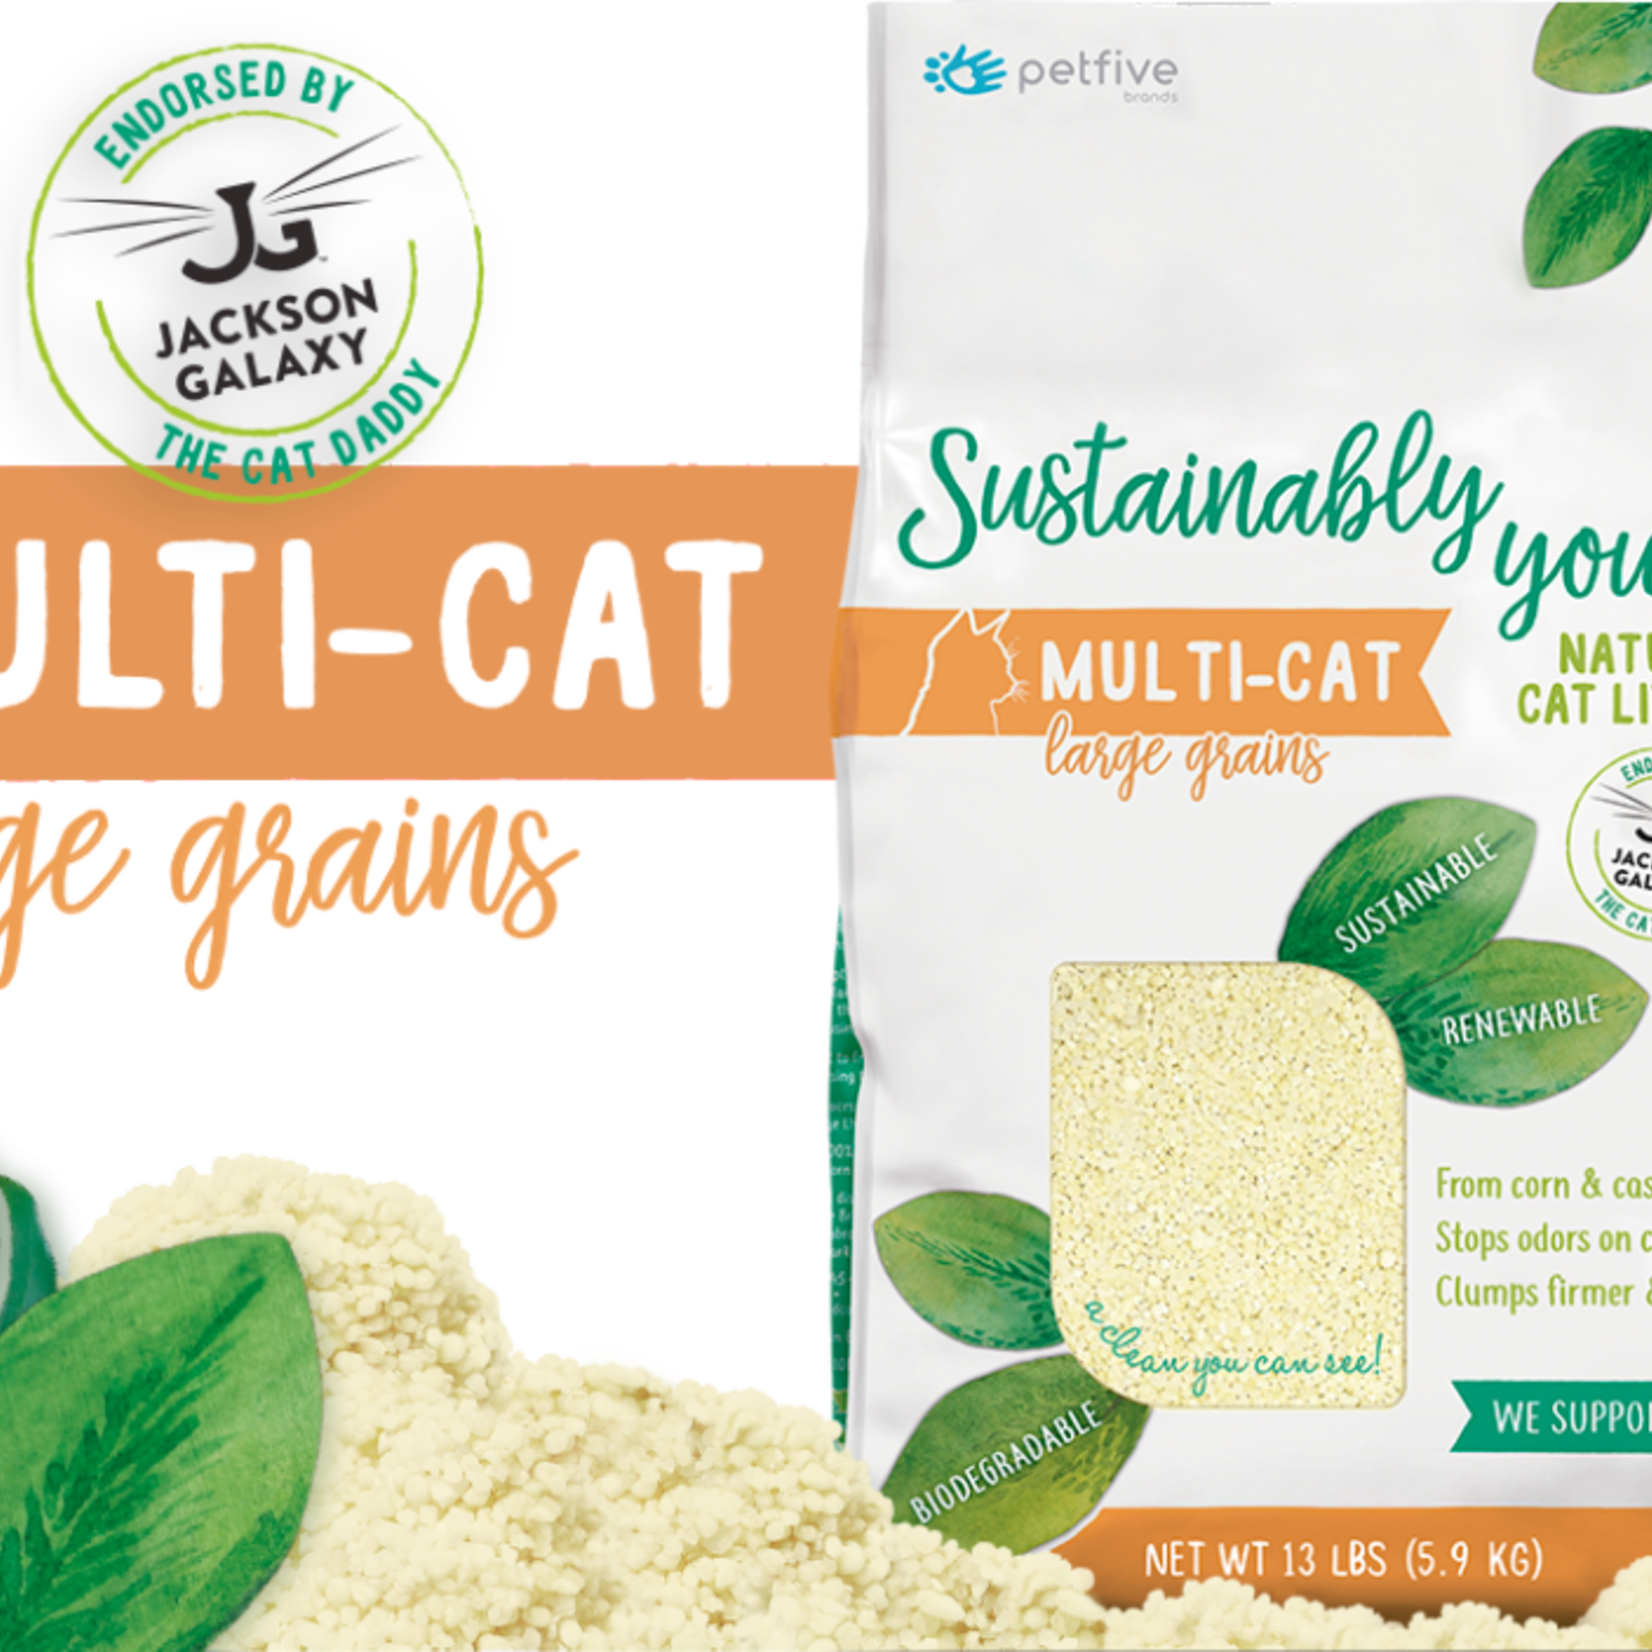 Sustainably Yours Sustainably Yours Cat Litter Large Grain 13#